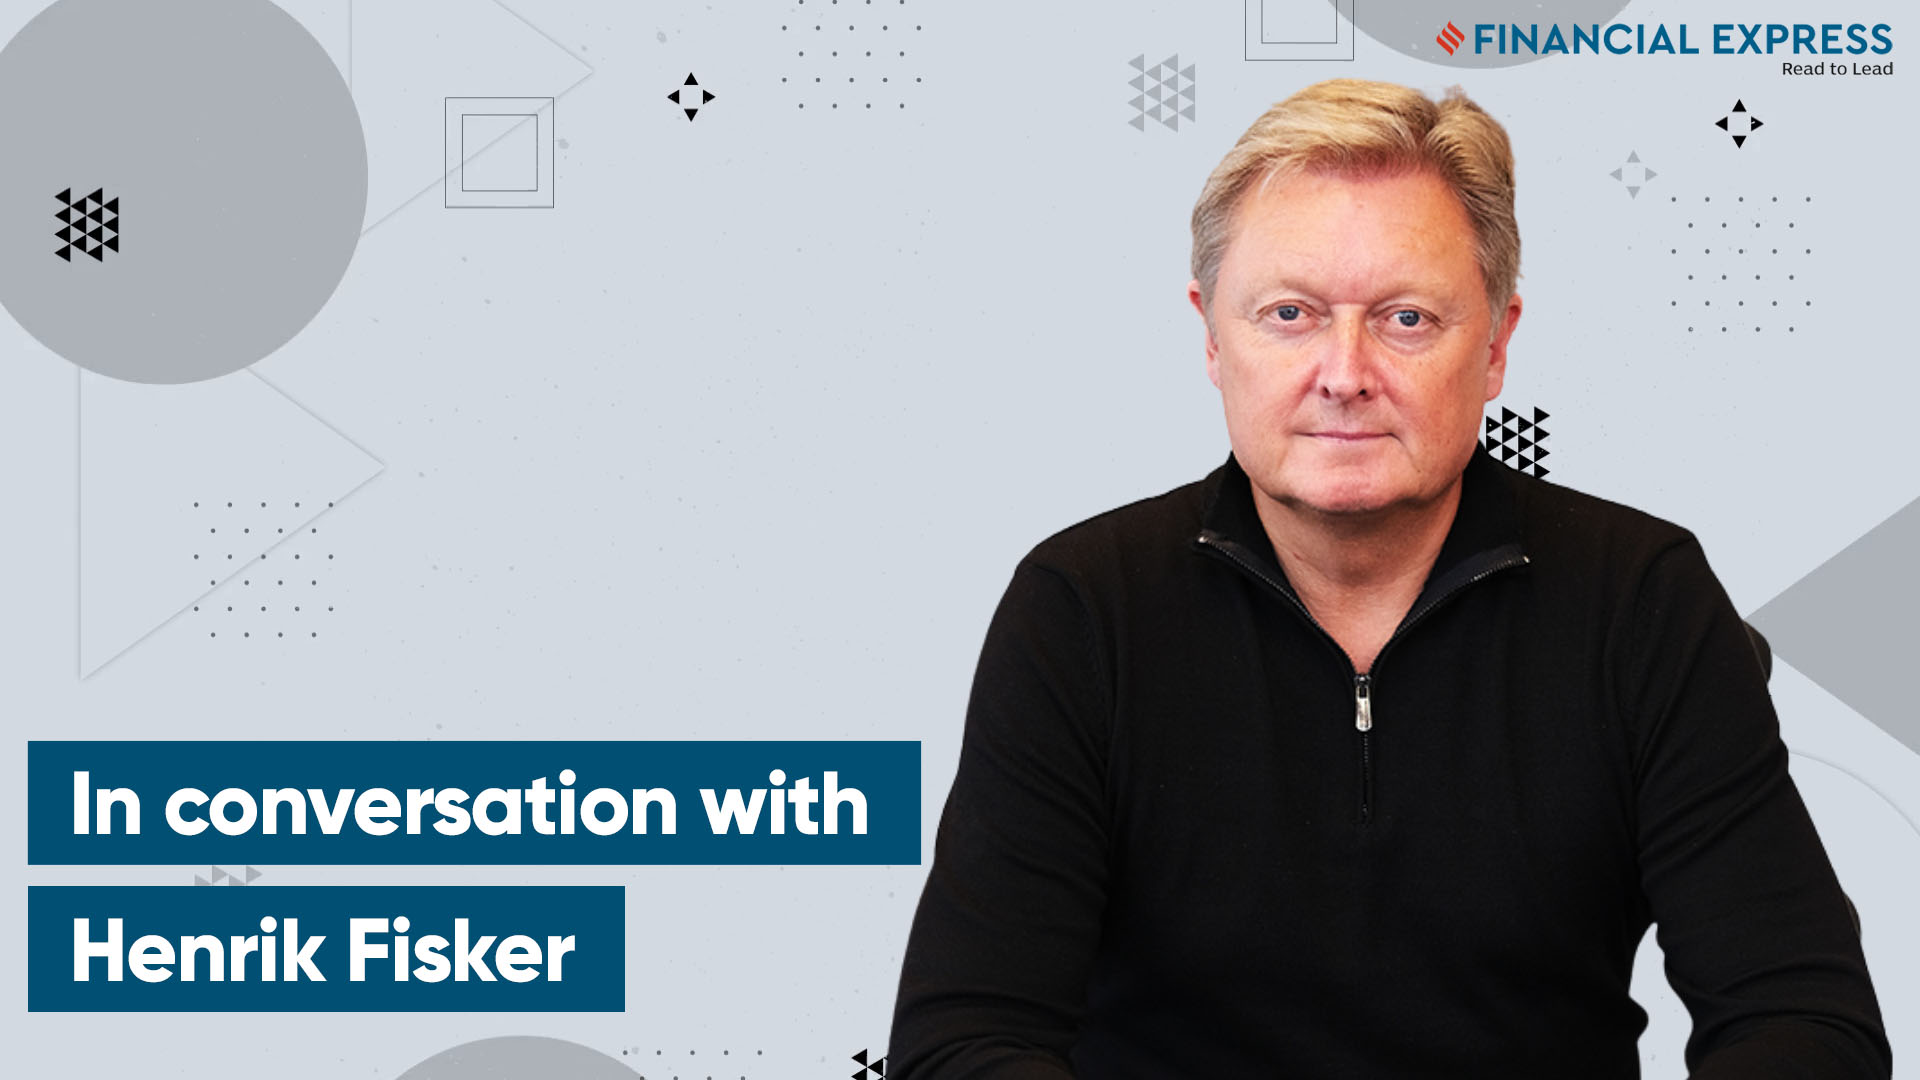 Henrik Fisker: “If we produce a vehicle in India, it will be together with a local partner.”